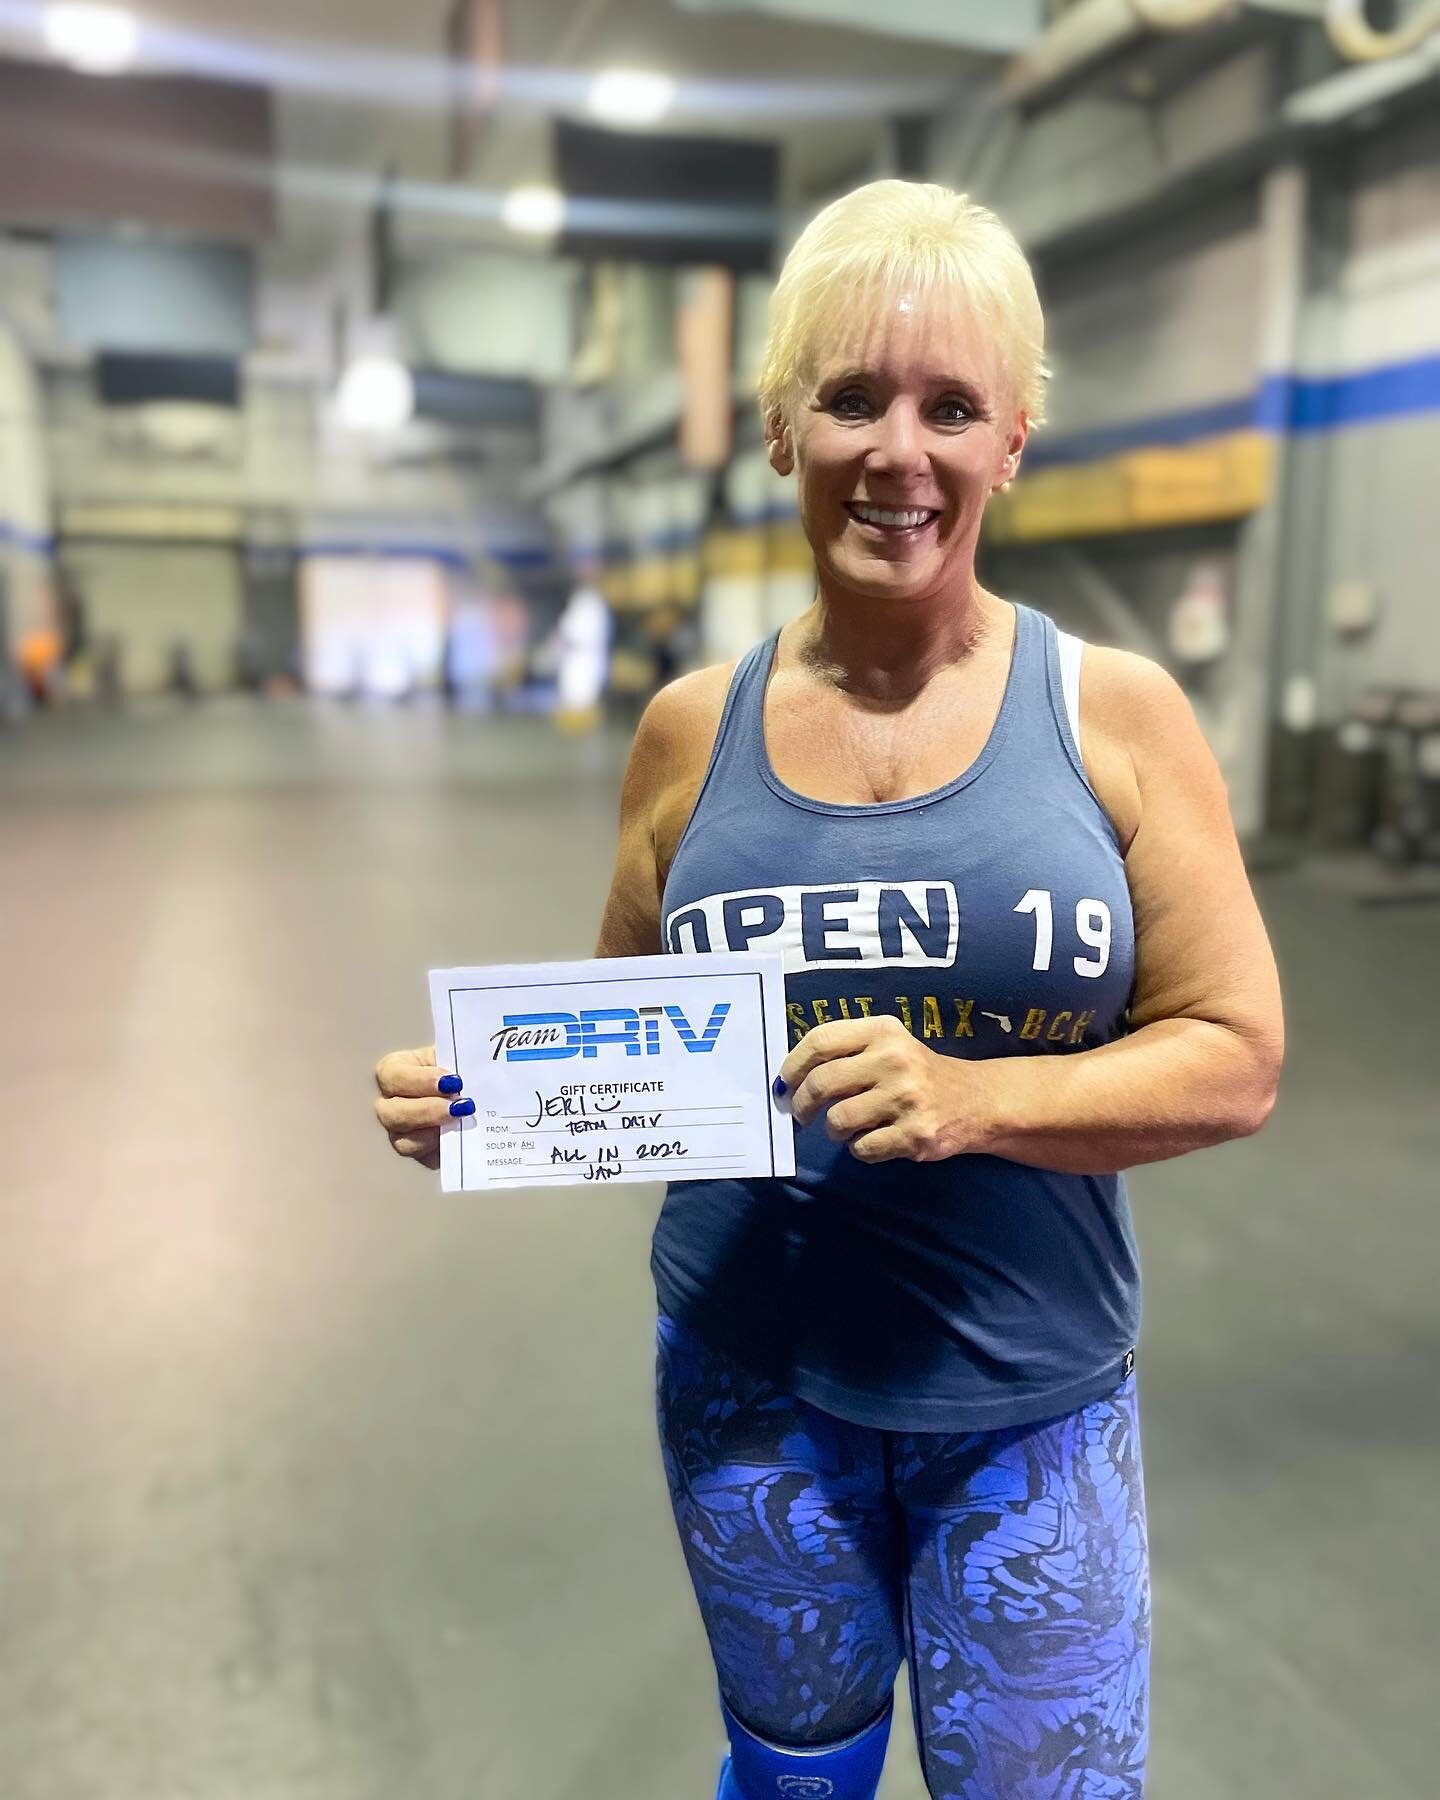 Congrats to Jeri for winning a $50 Gift Card for this months DRiV All-In Challenge!

And congrats to every one else who had at least 16 check-ins for the month of January. 

We&rsquo;re starting off strong, let&rsquo;s keep it going!